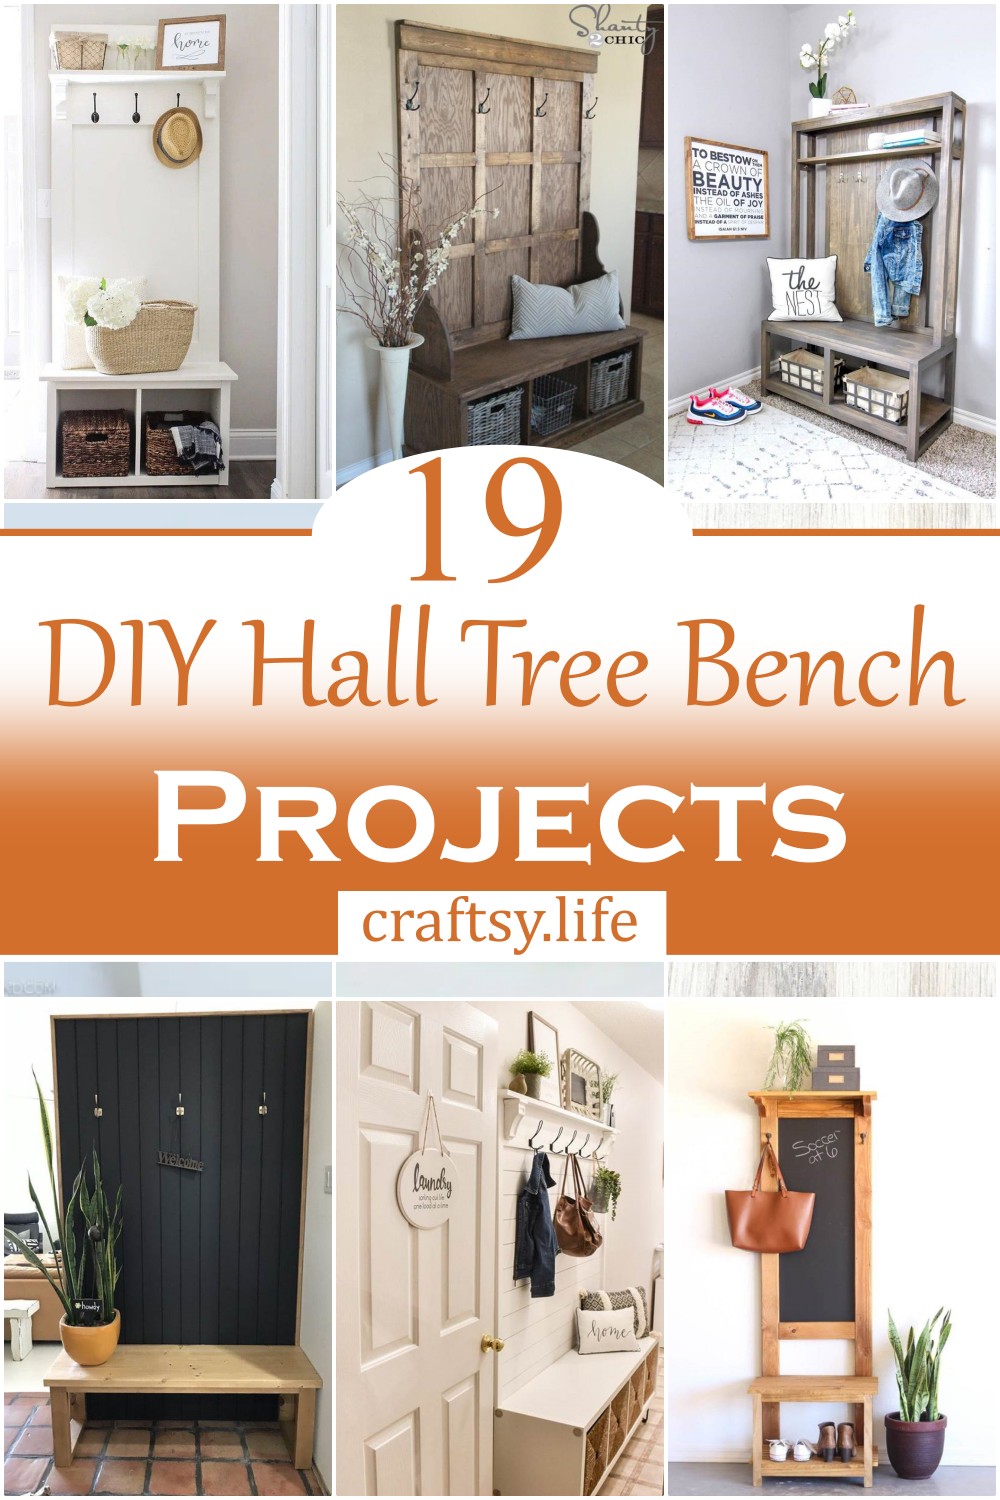 DIY Hall Tree Bench Projects